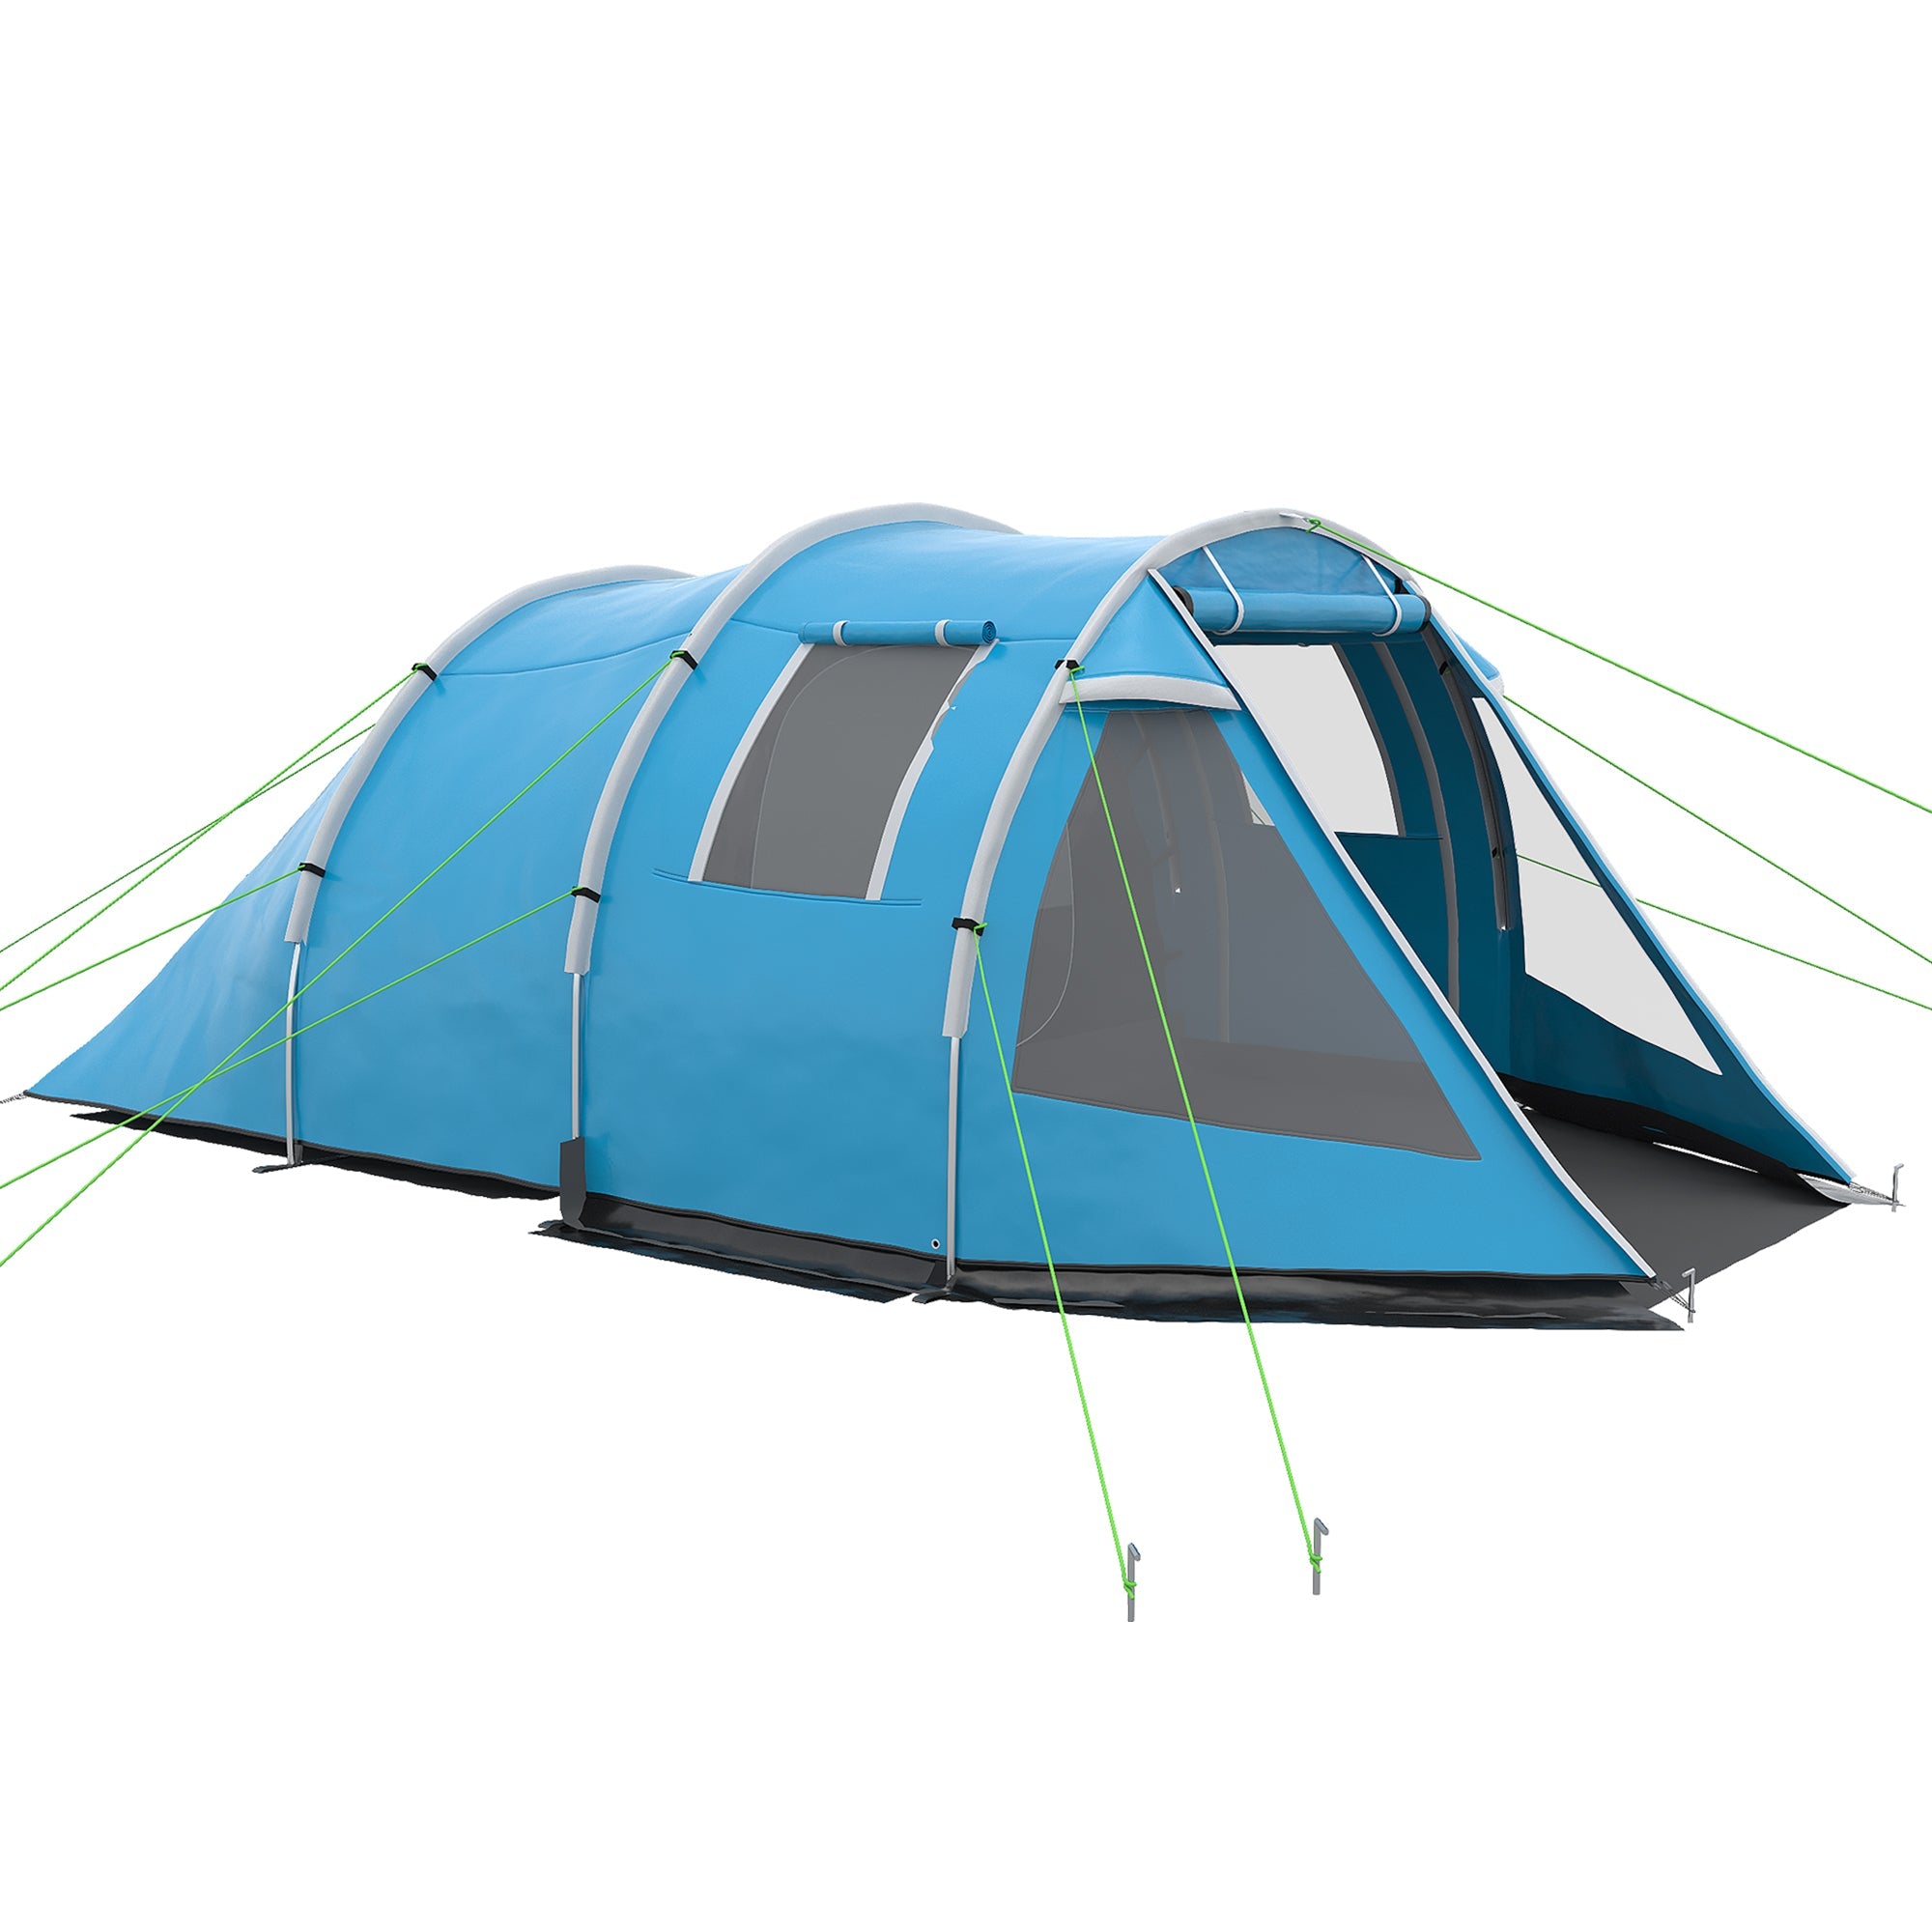 Outsunny 3-4 Man Tunnel Tent, Two Room Camping Tent with Windows and Covers, Portable Carry Bag, for Fishing, Hiking, Sports, Festival - Blue - TovaHaus